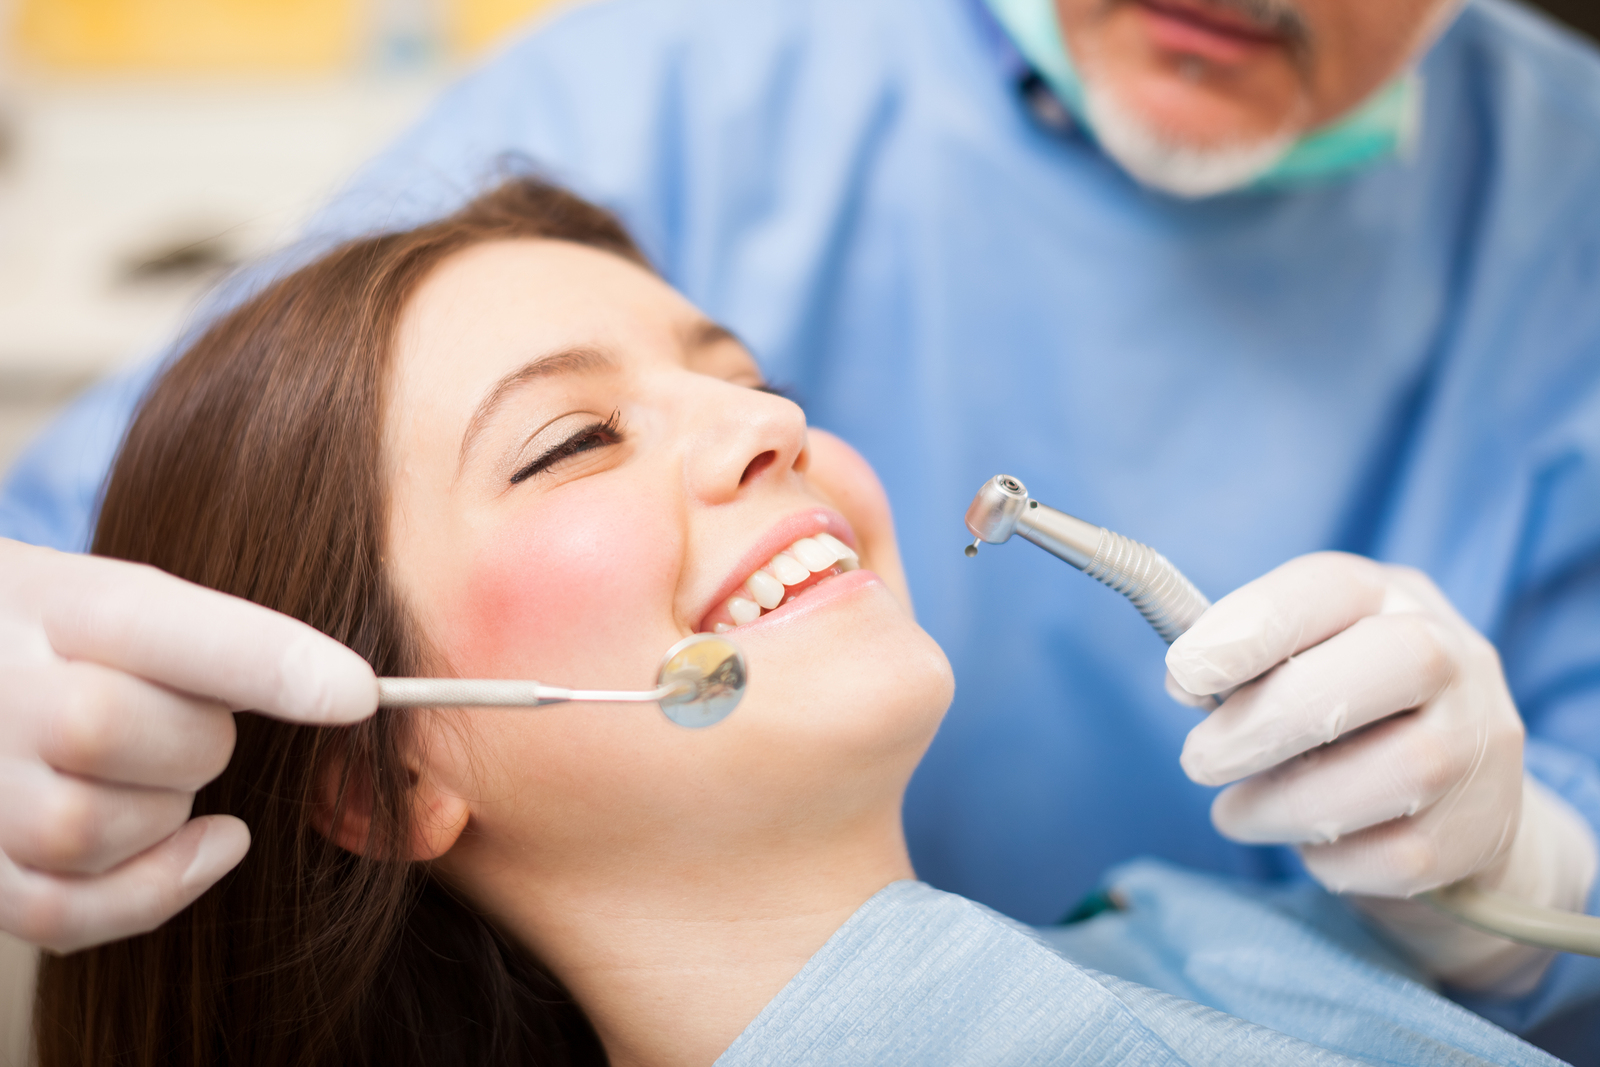 What will you get when you visit your dentist regularly?